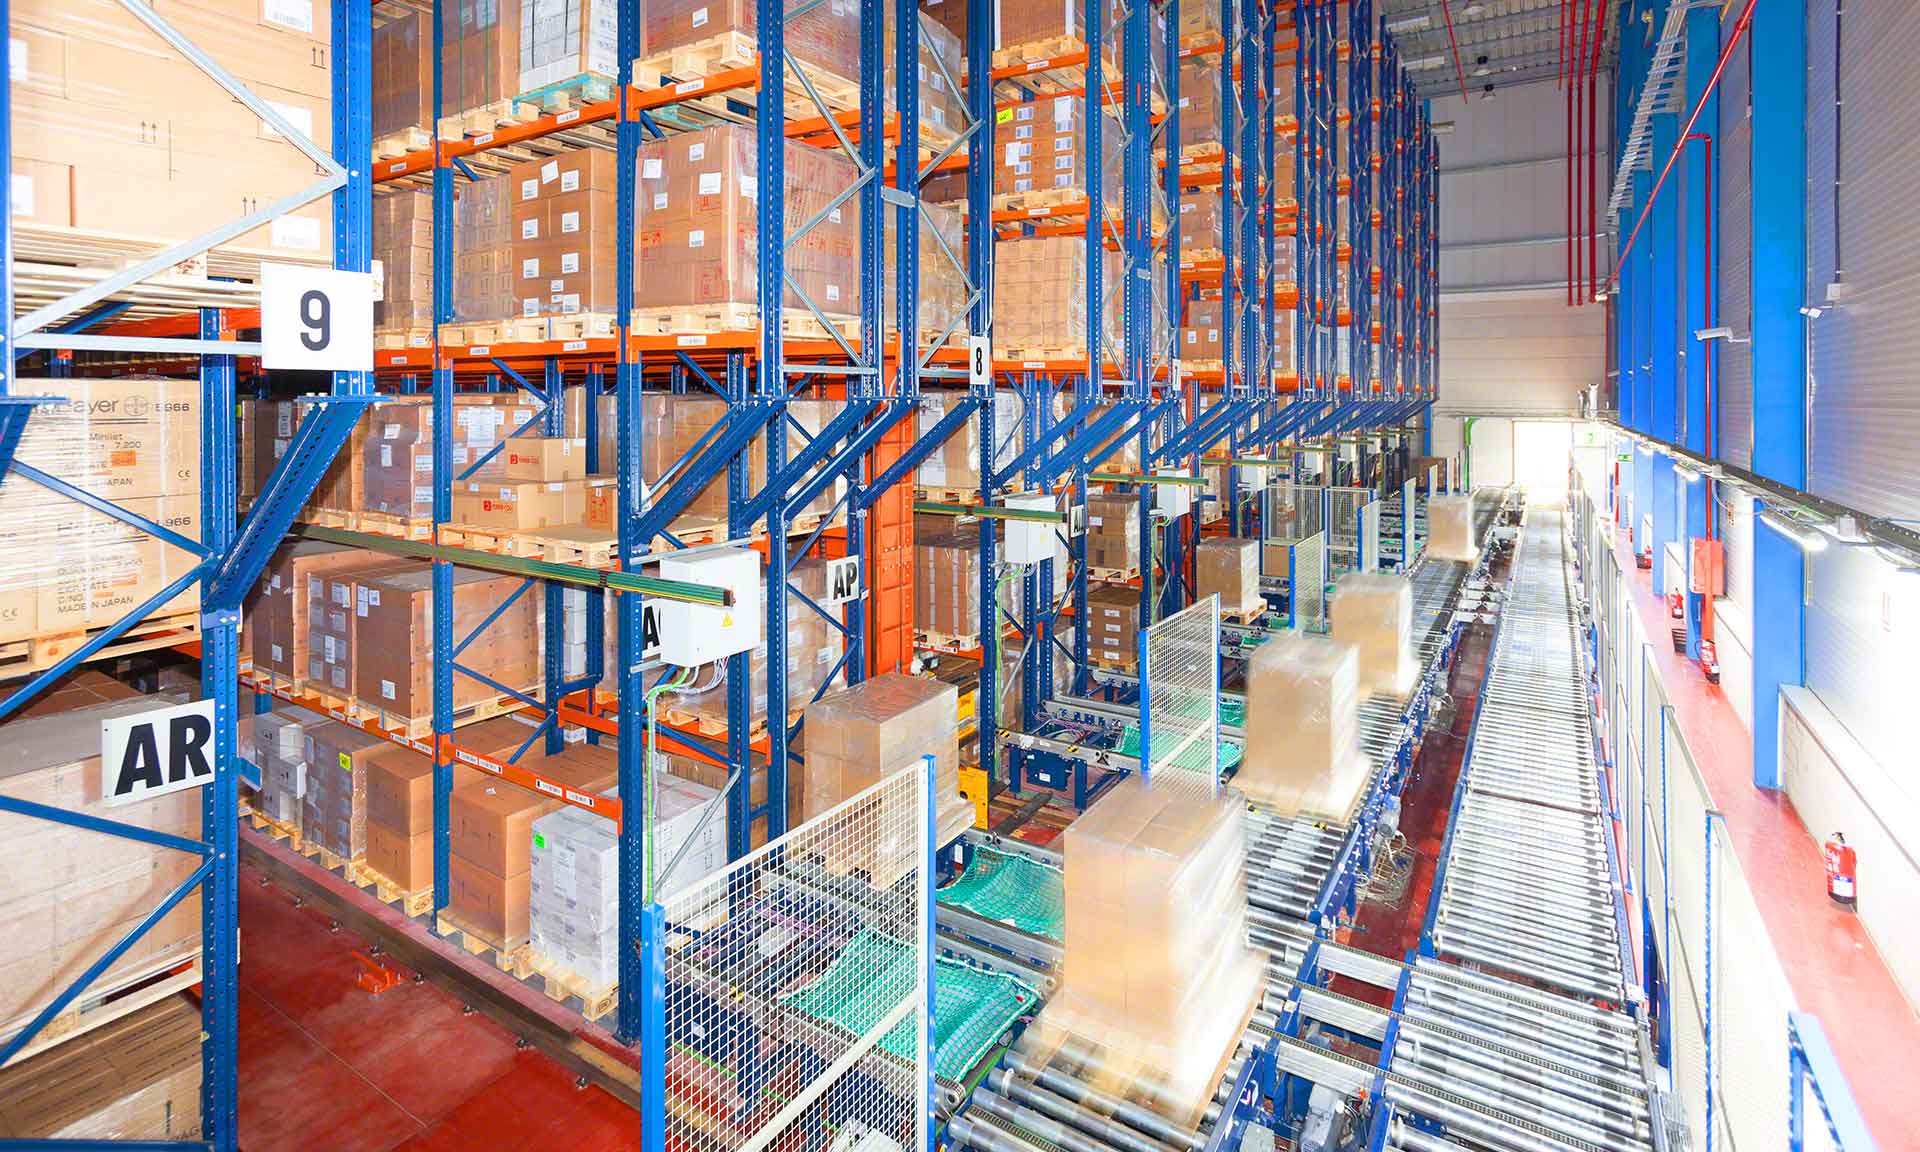 Automated replenishment is the process of implementing automated systems to perform goods replenishment